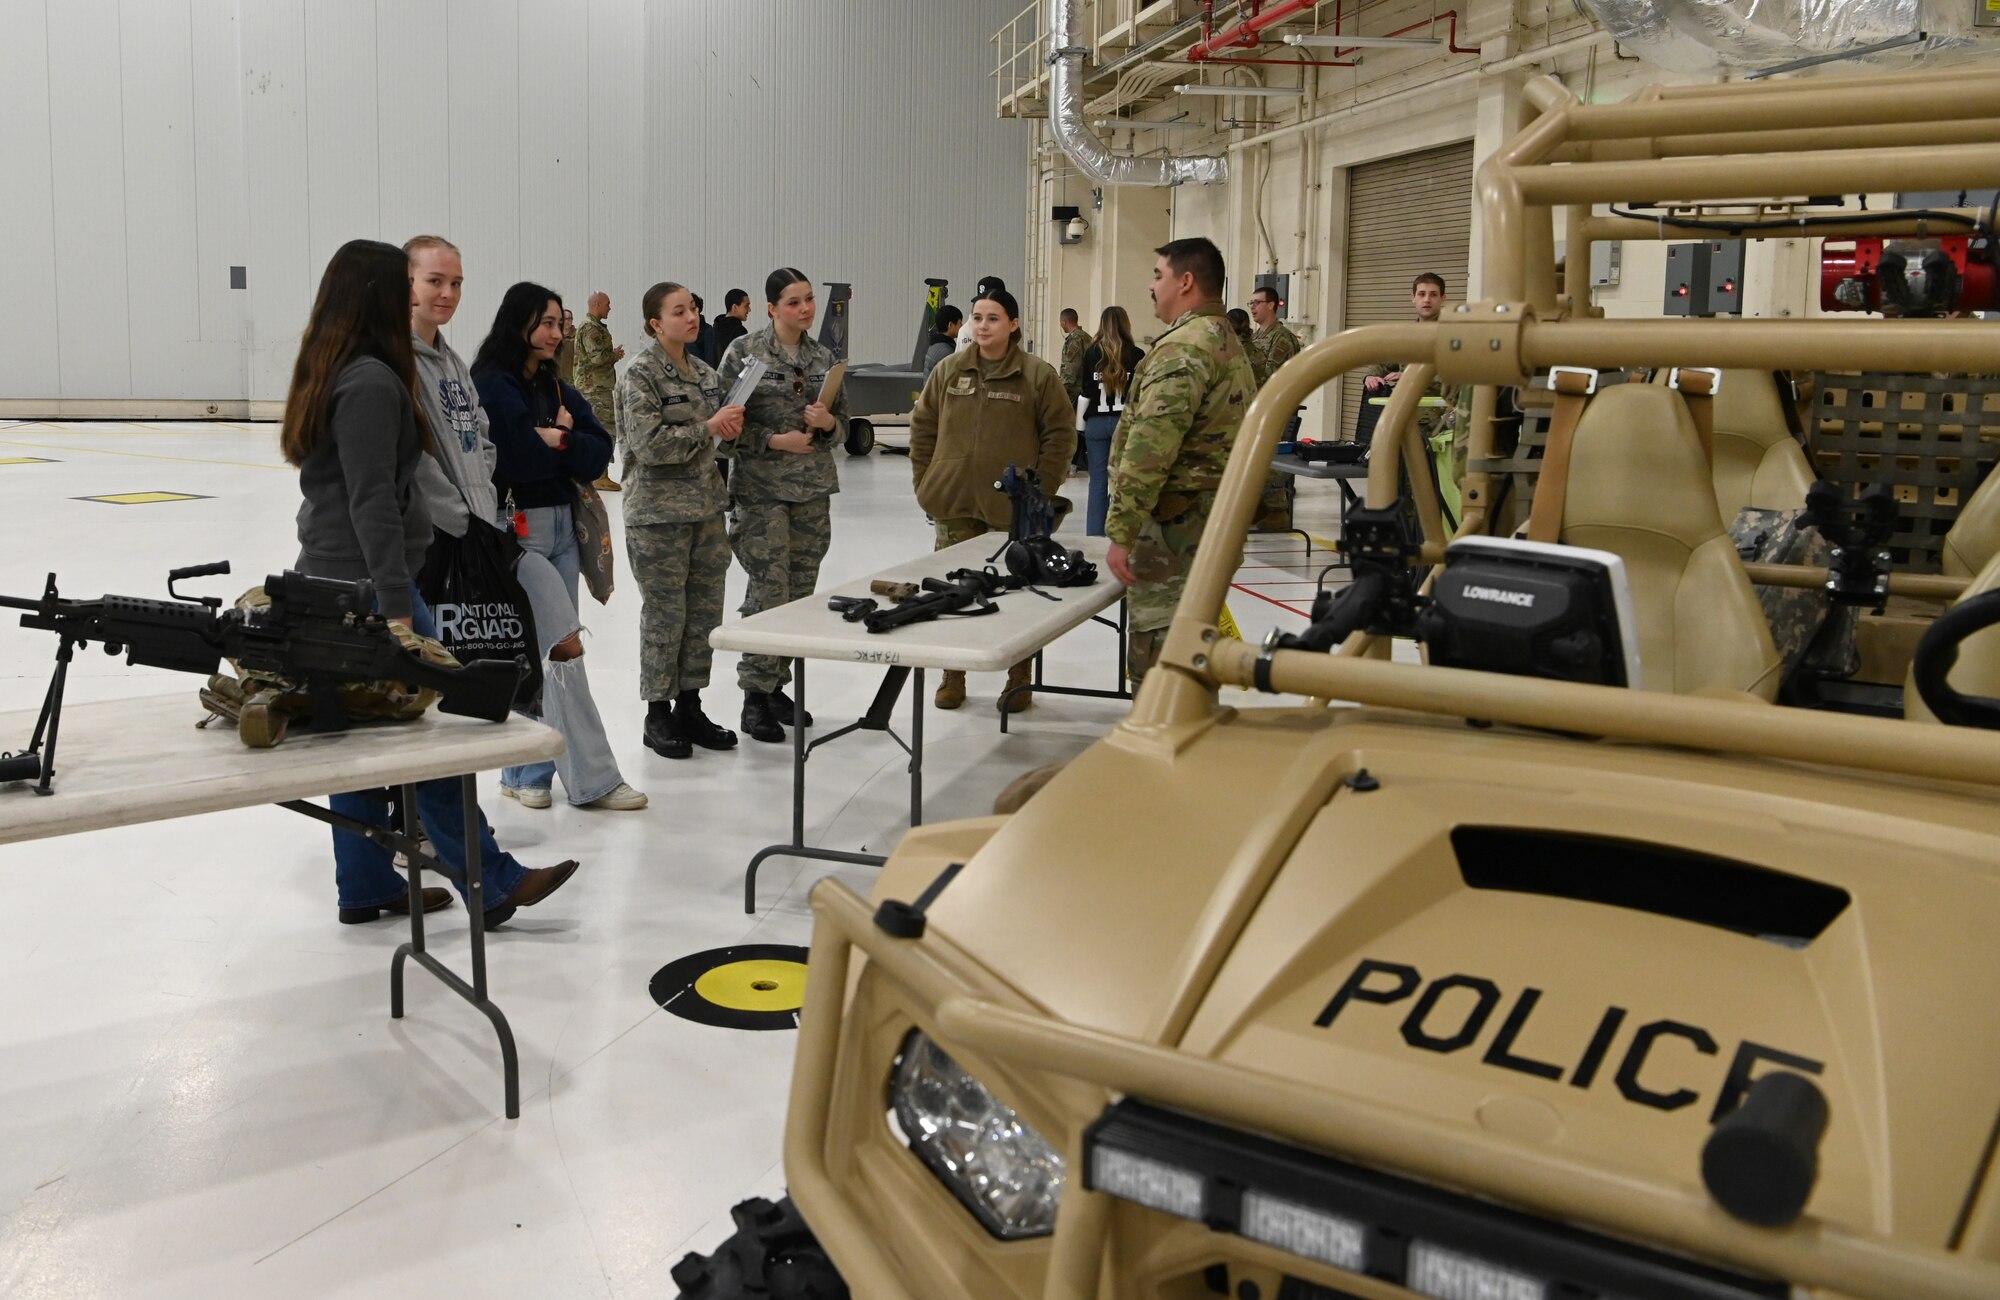 high school students look at military equipment